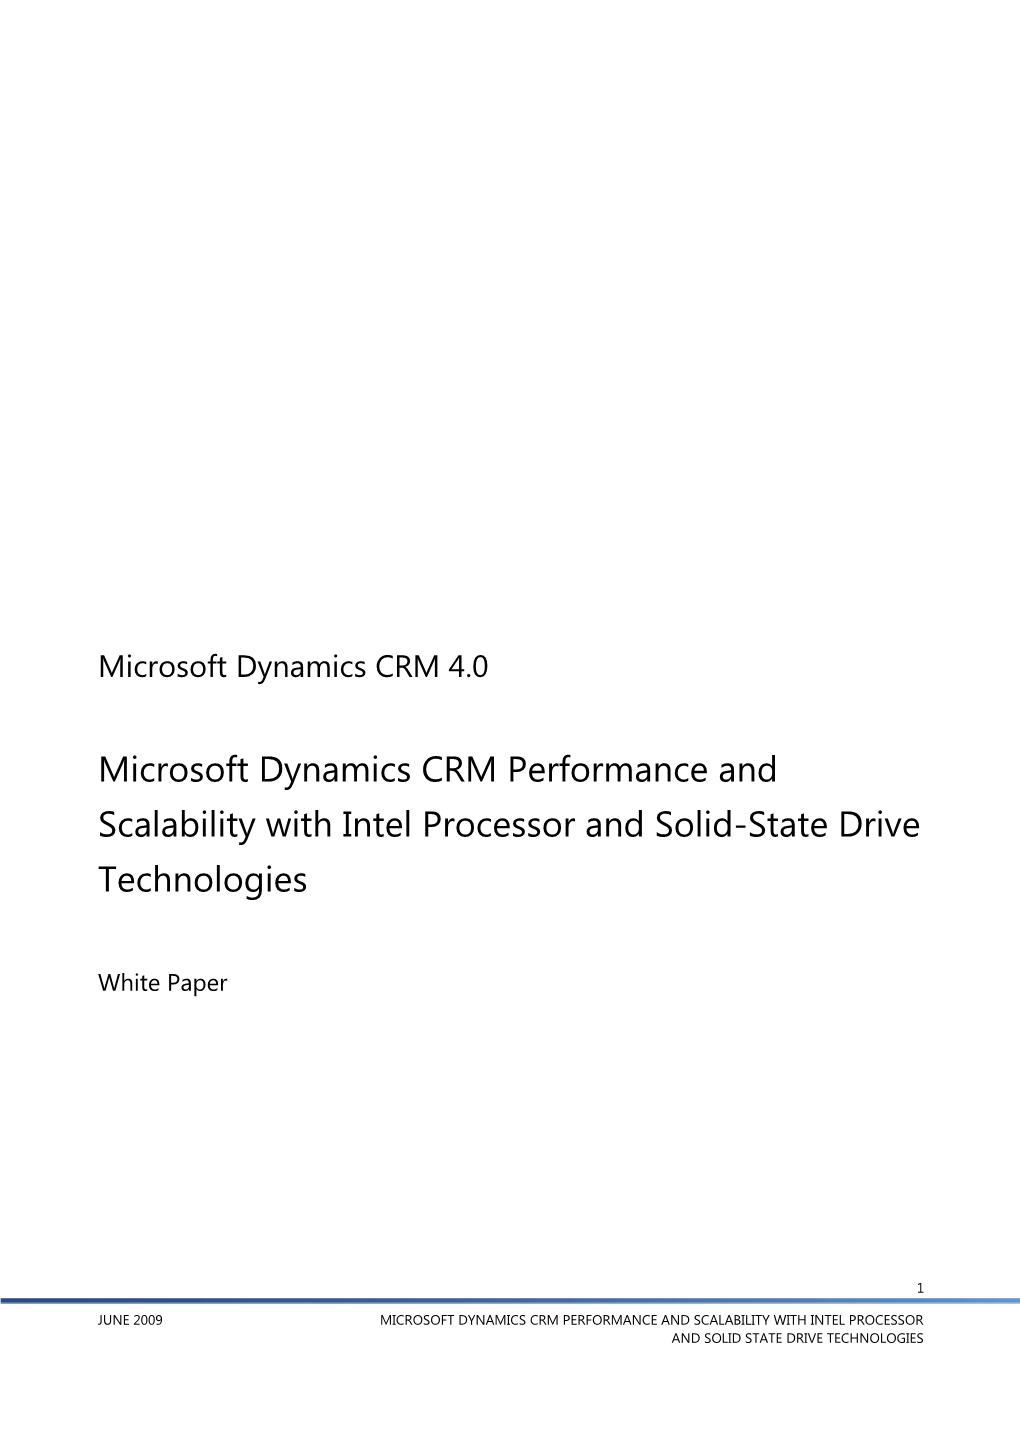 Microsoft Dynamics CRM 4.0 Performance and Scalability with Intel